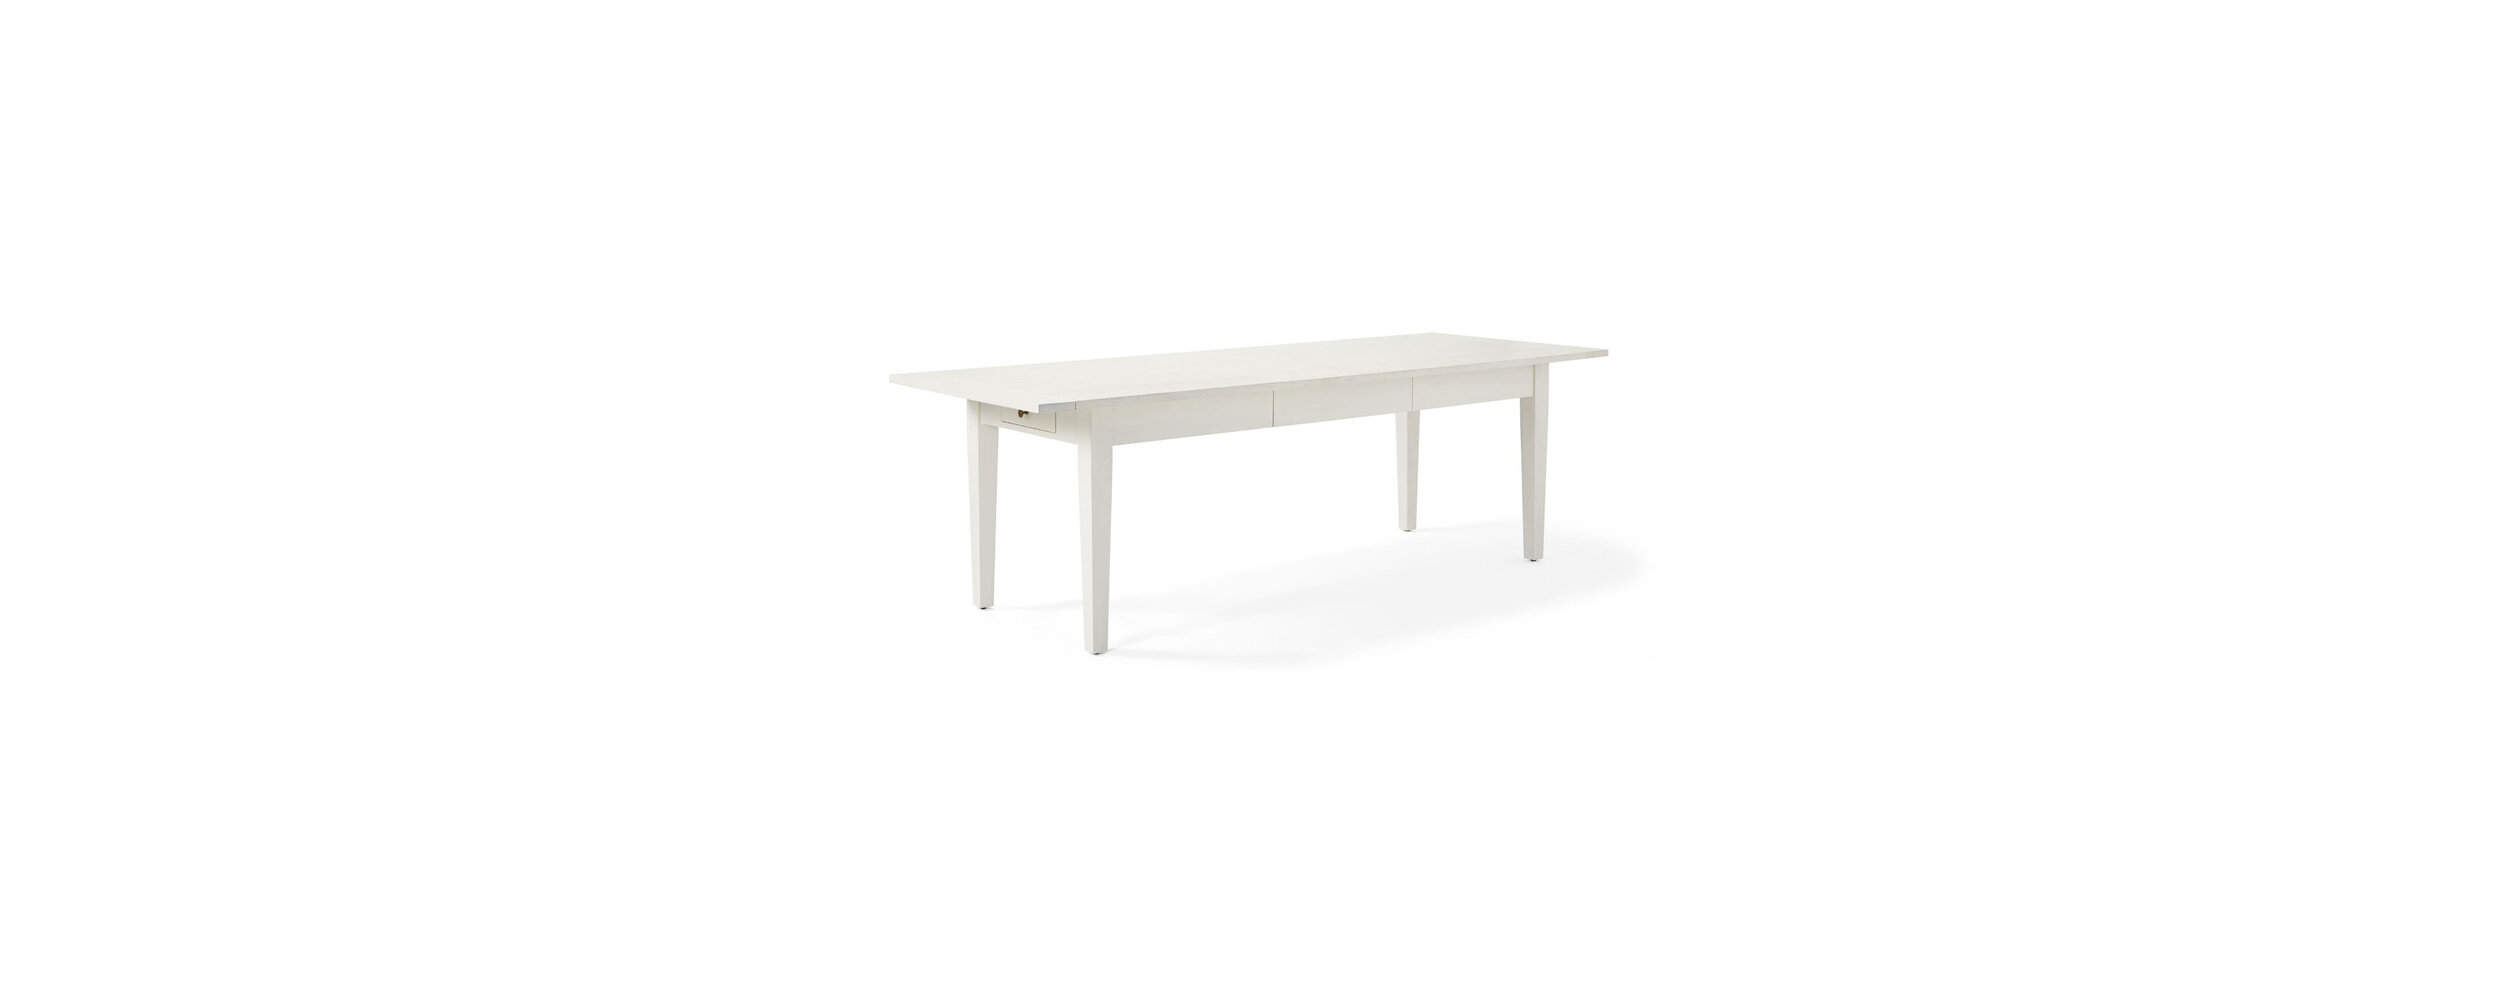 Furn_Beach_House_Dining_Table_Salt_Washed_84in_Extension_Angle_MV_0057_Crop_SH.jpg